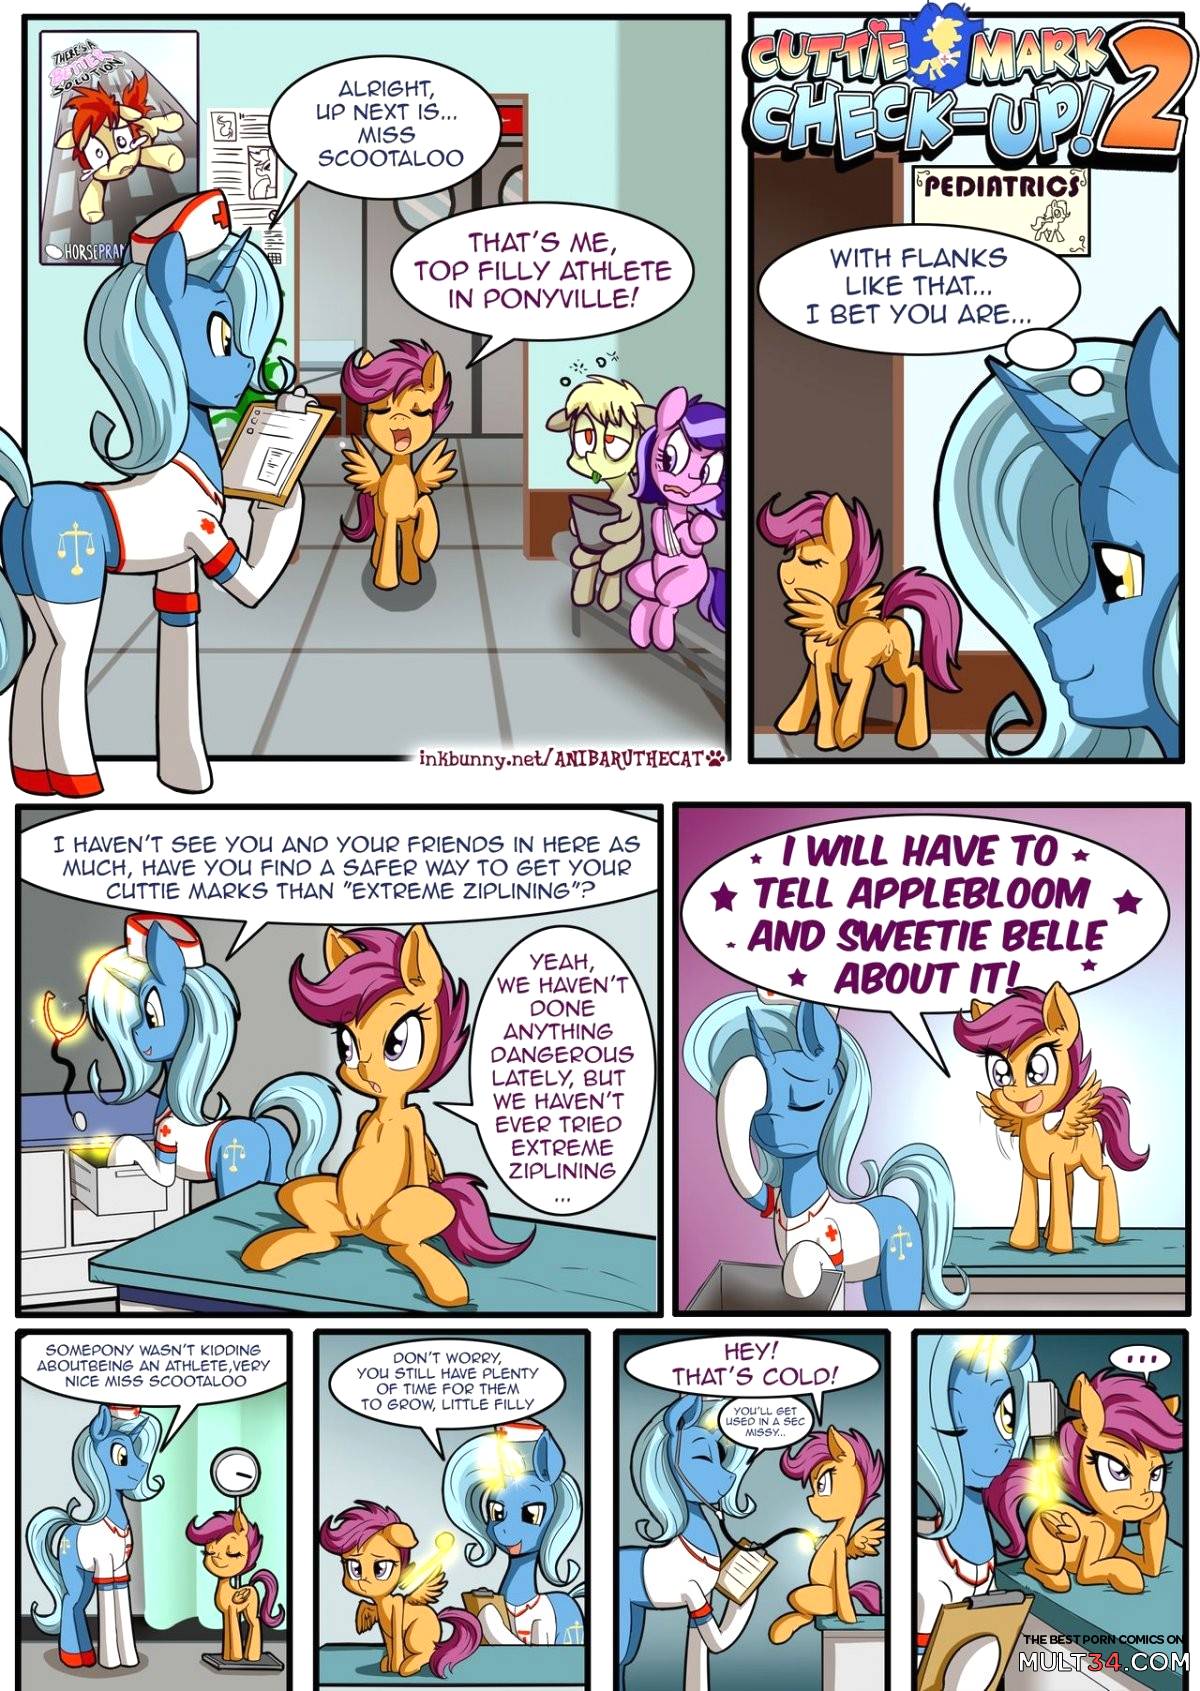 Cutie mark check up 2 page 2